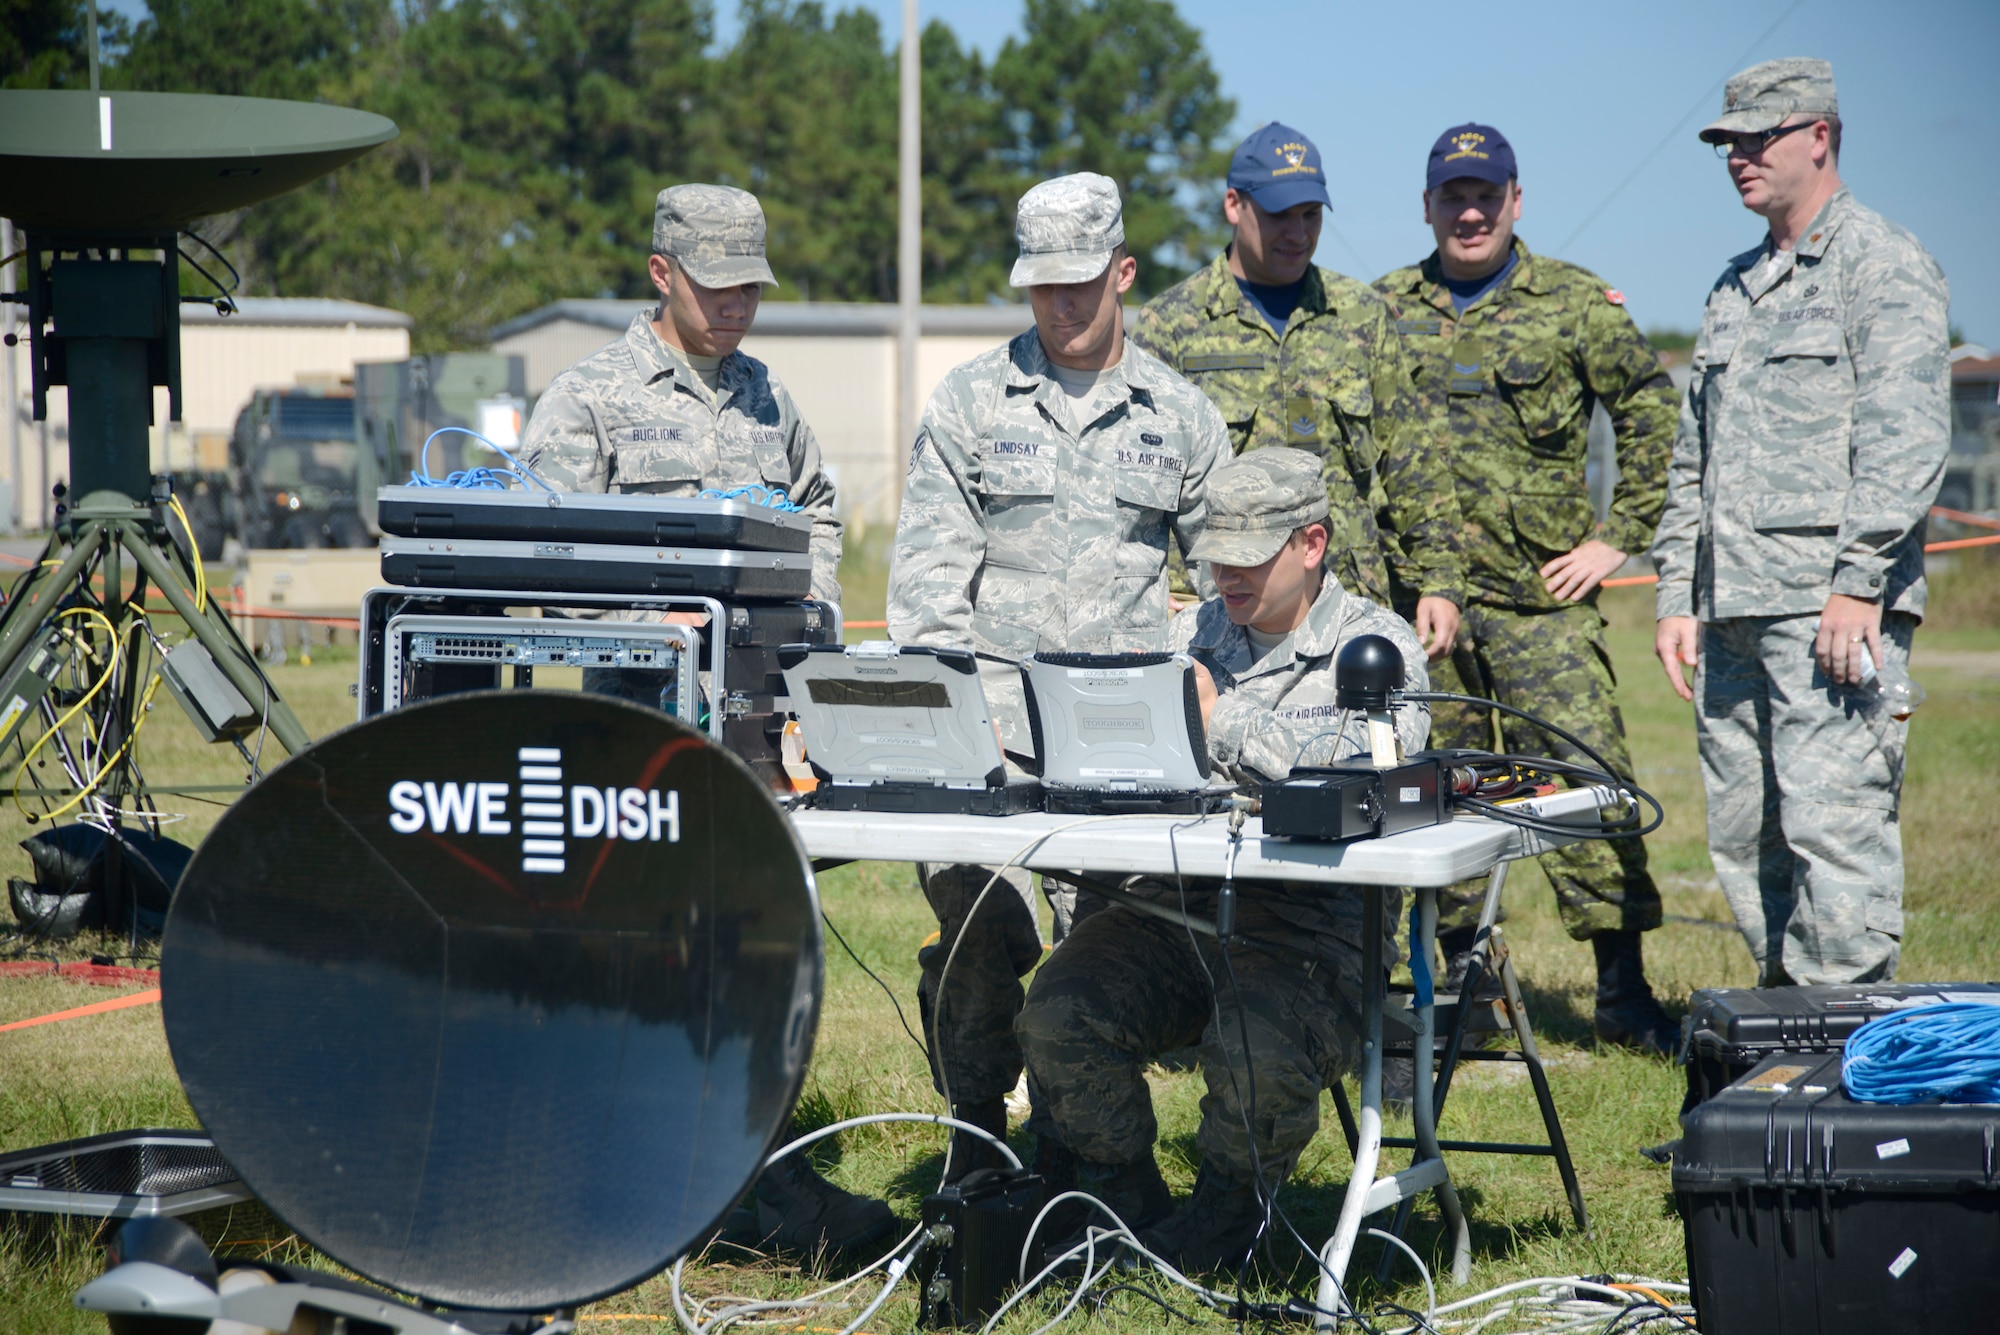 Members of the 5th Combat Communications Group and 8 Air Communication Control Squadron set up and position equipment to be used during their joint training event. (U.S. Air Force photo by Ed Aspera)


